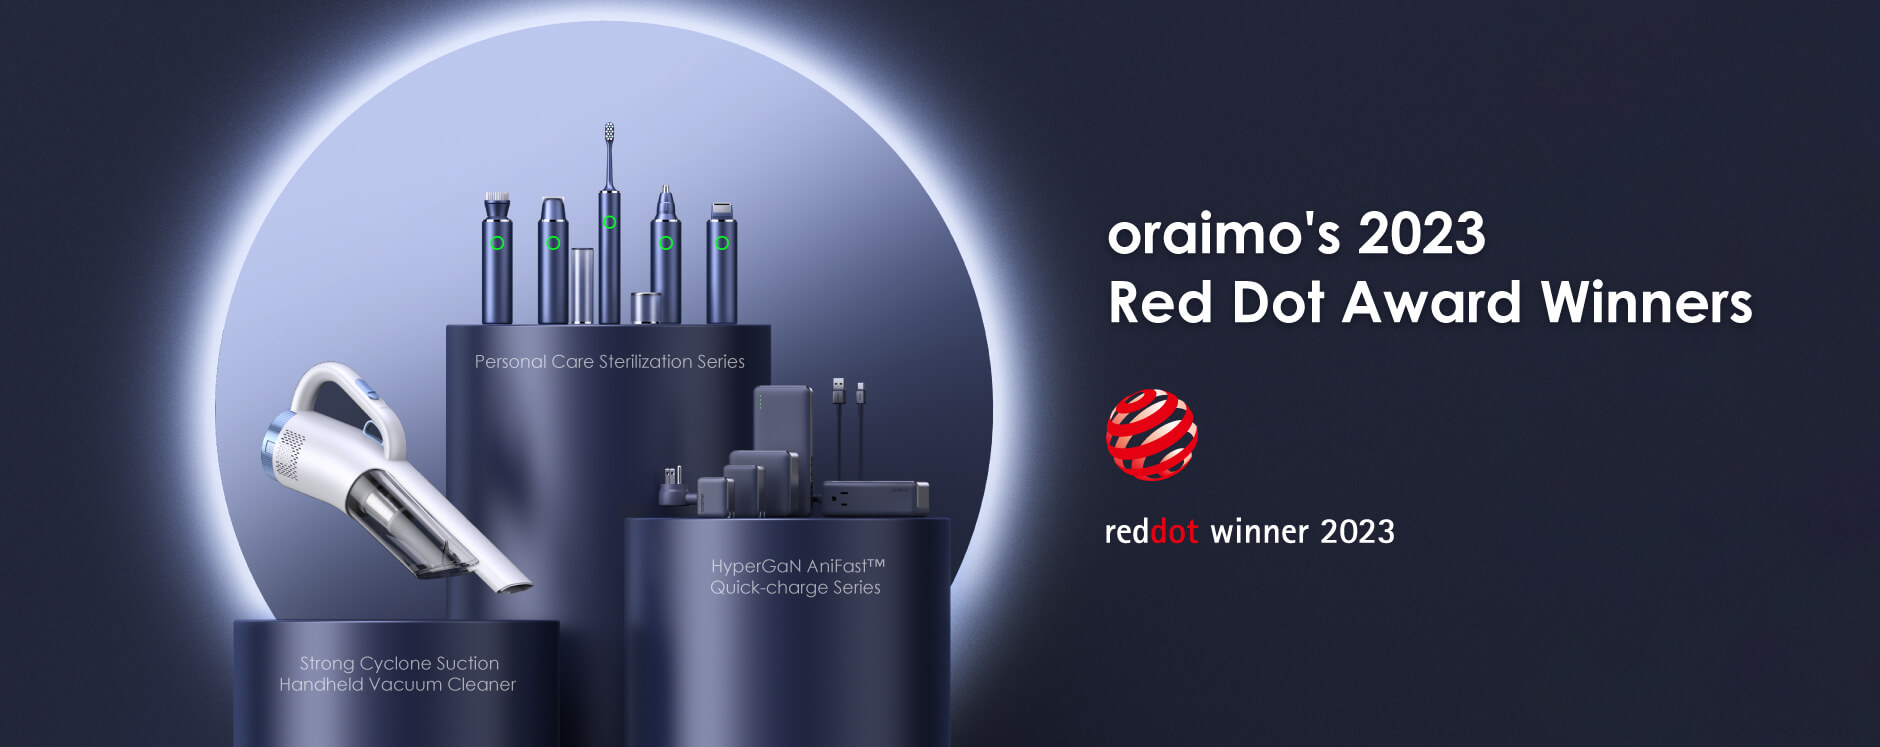 oraimo is the winner of red dot award in 2023